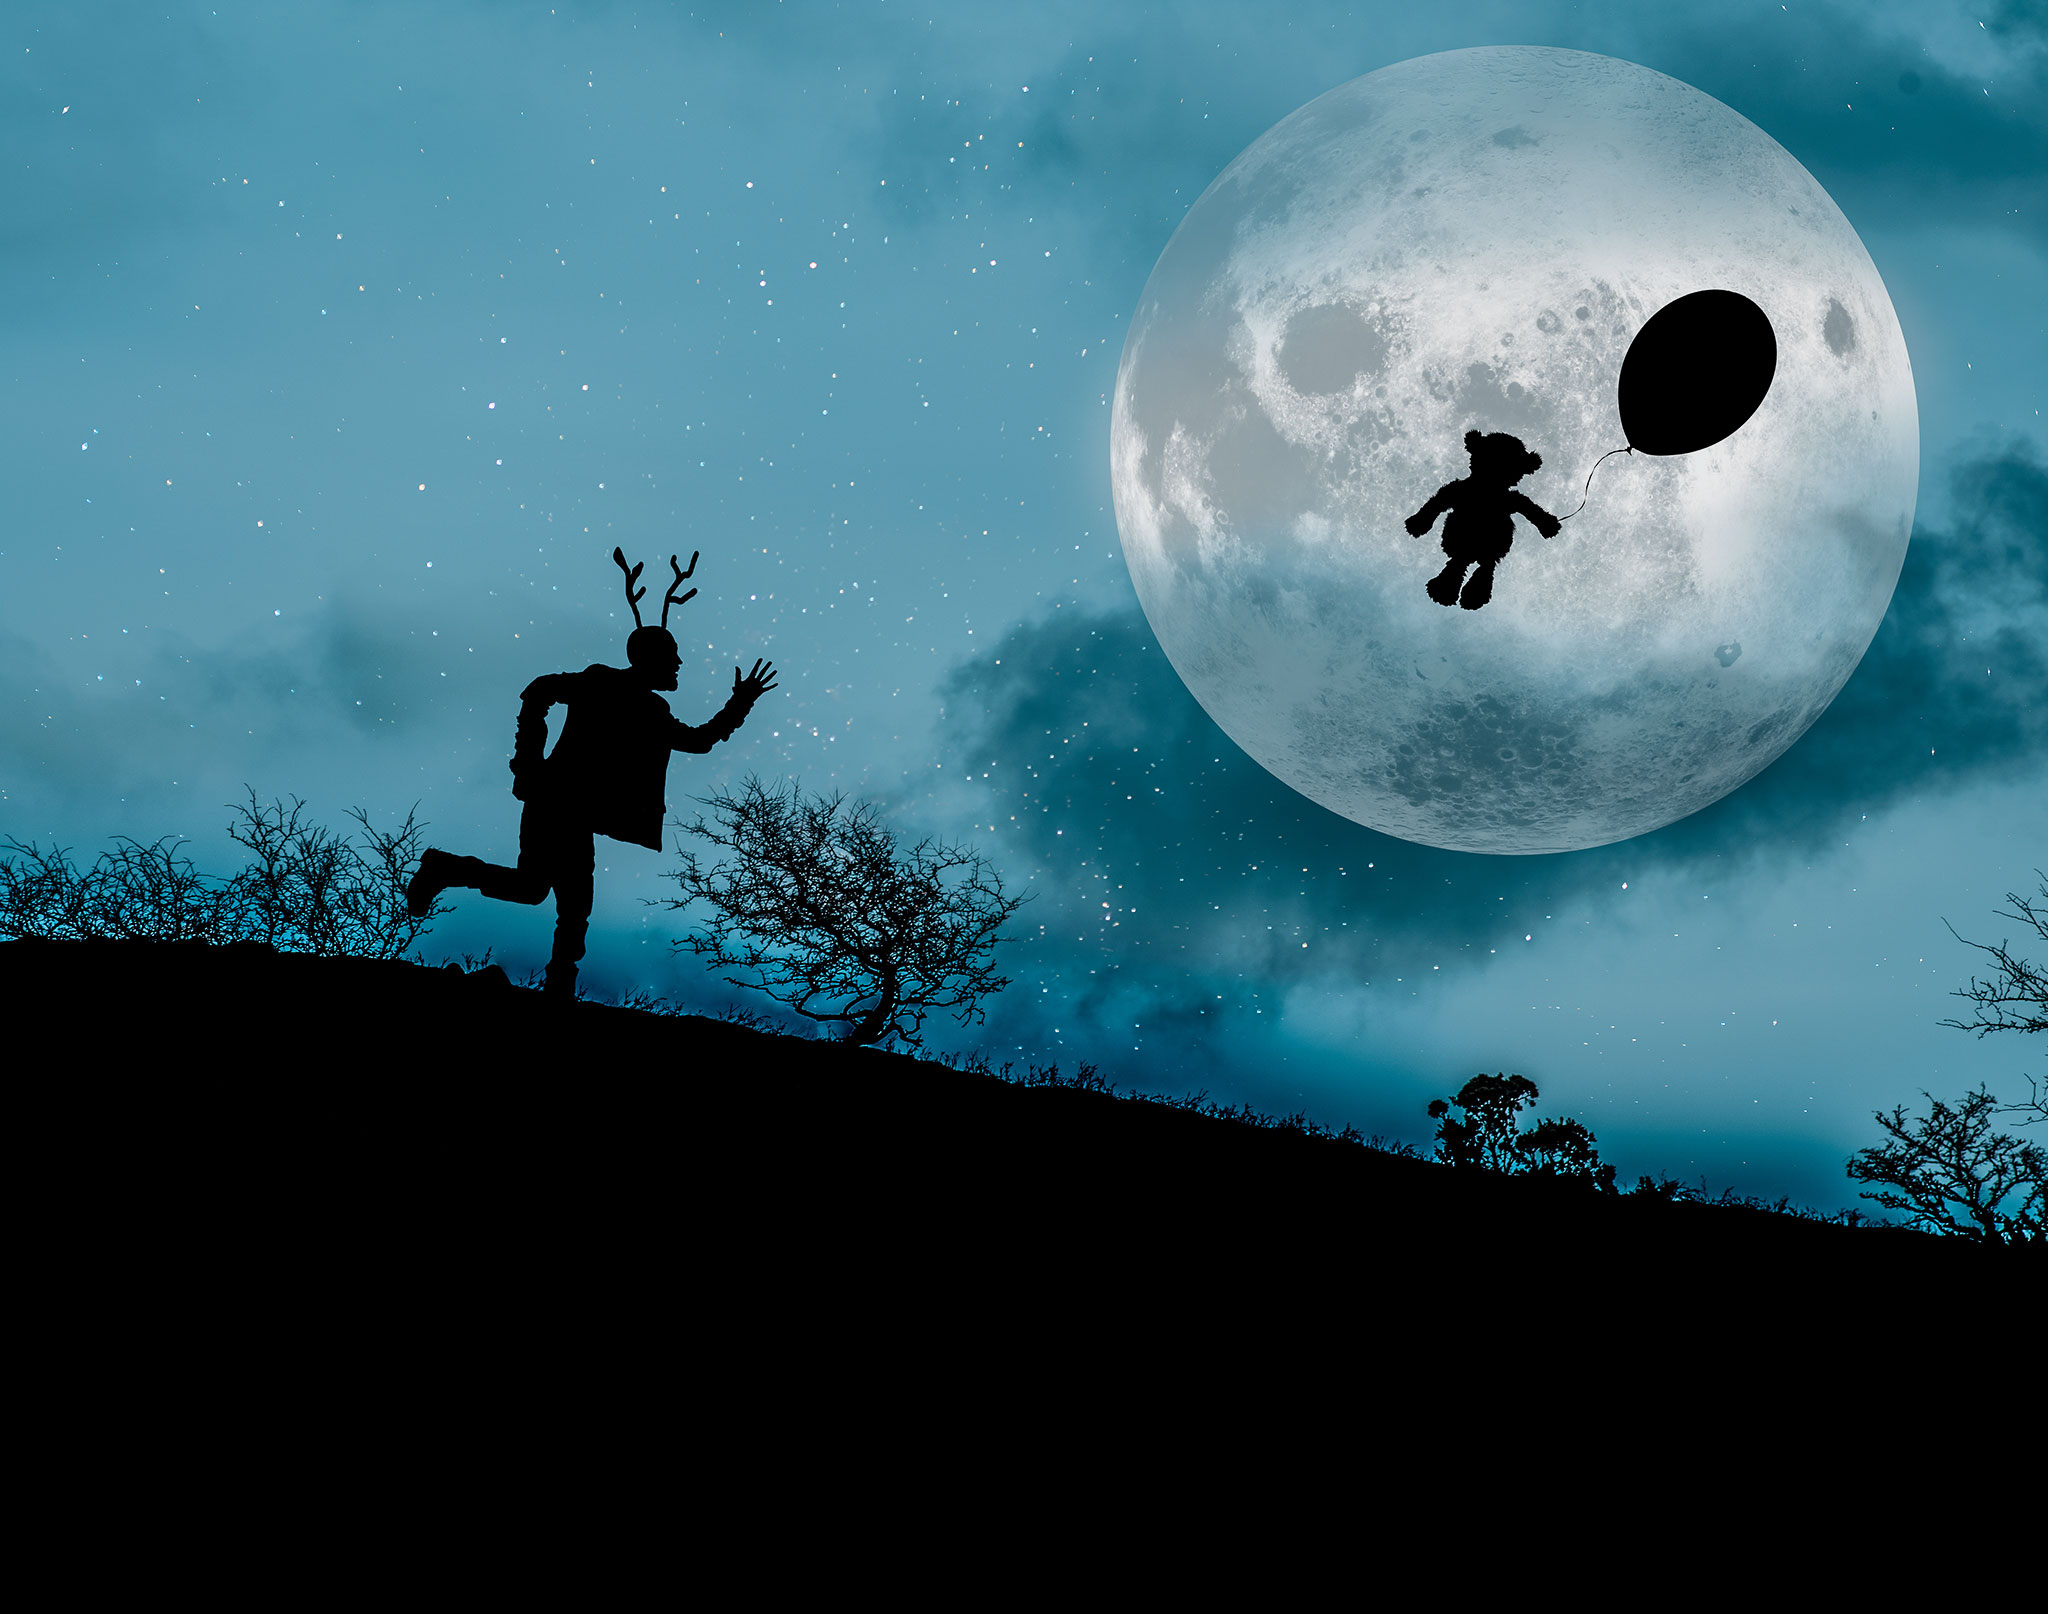 A deer chases baby snowy whose balloon has taken him to the moon